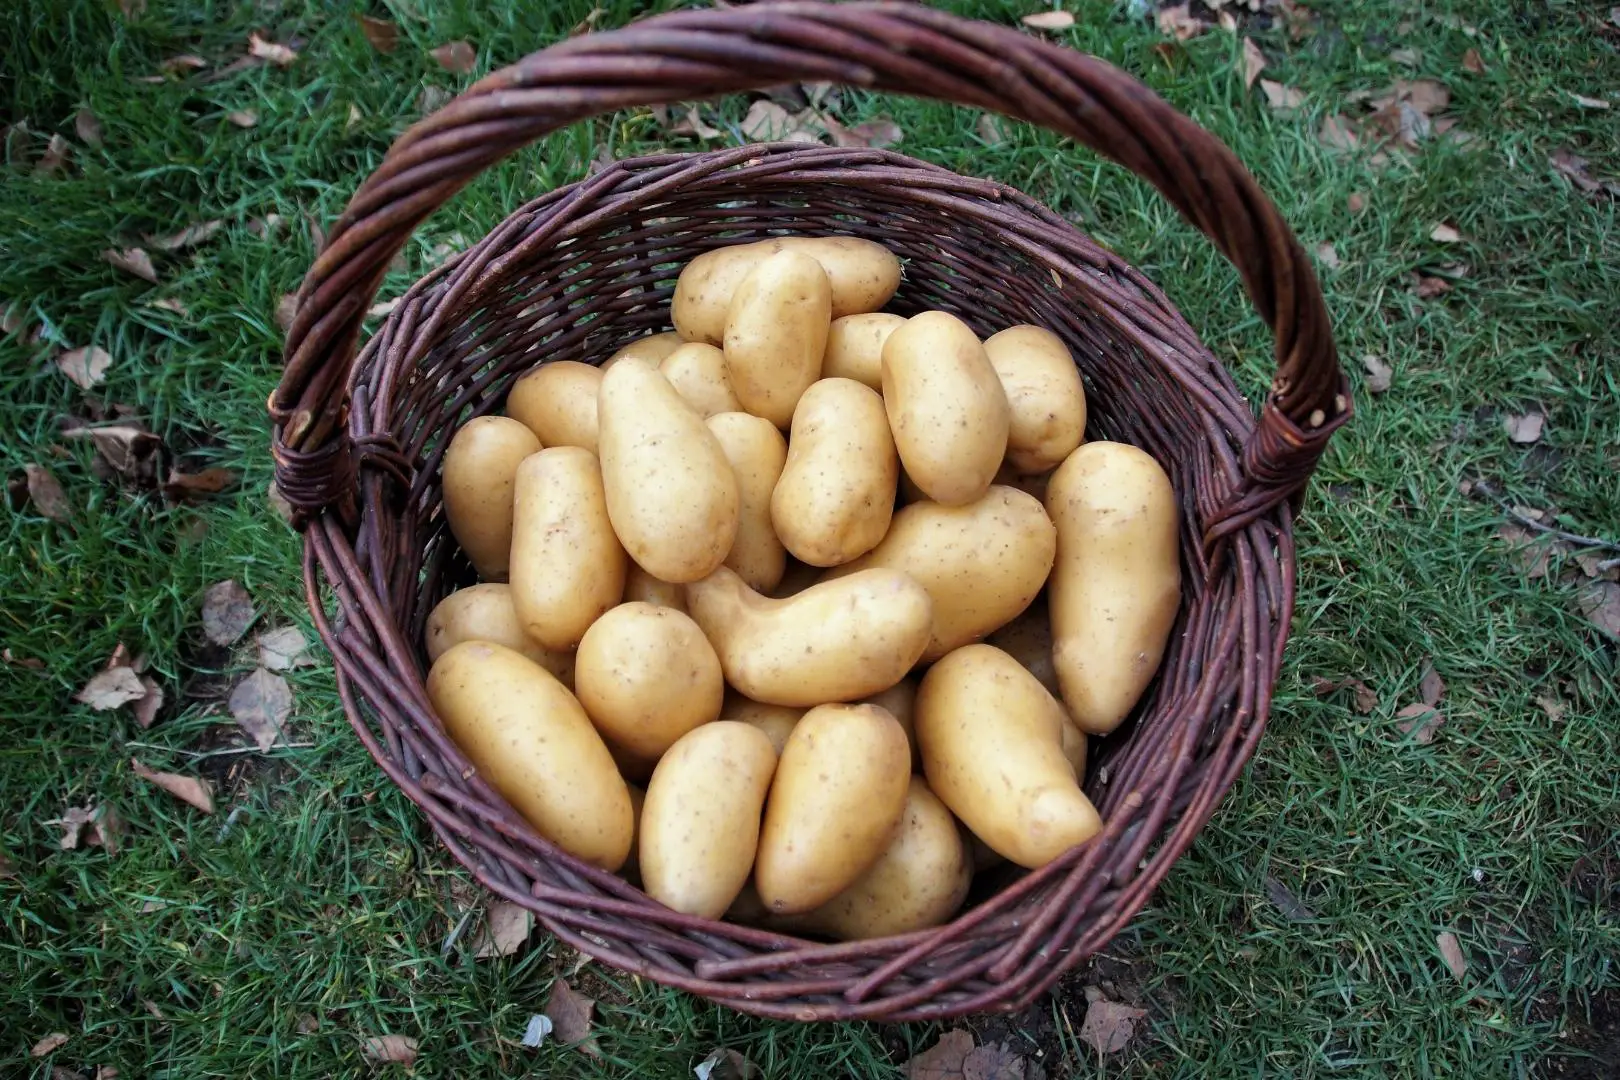 % Potatoes are a great crop to grow hydroponically. They are very productive and can be grown in many different types of hydroponic systems. There are a few things you can do to increase the yield of potatoes.